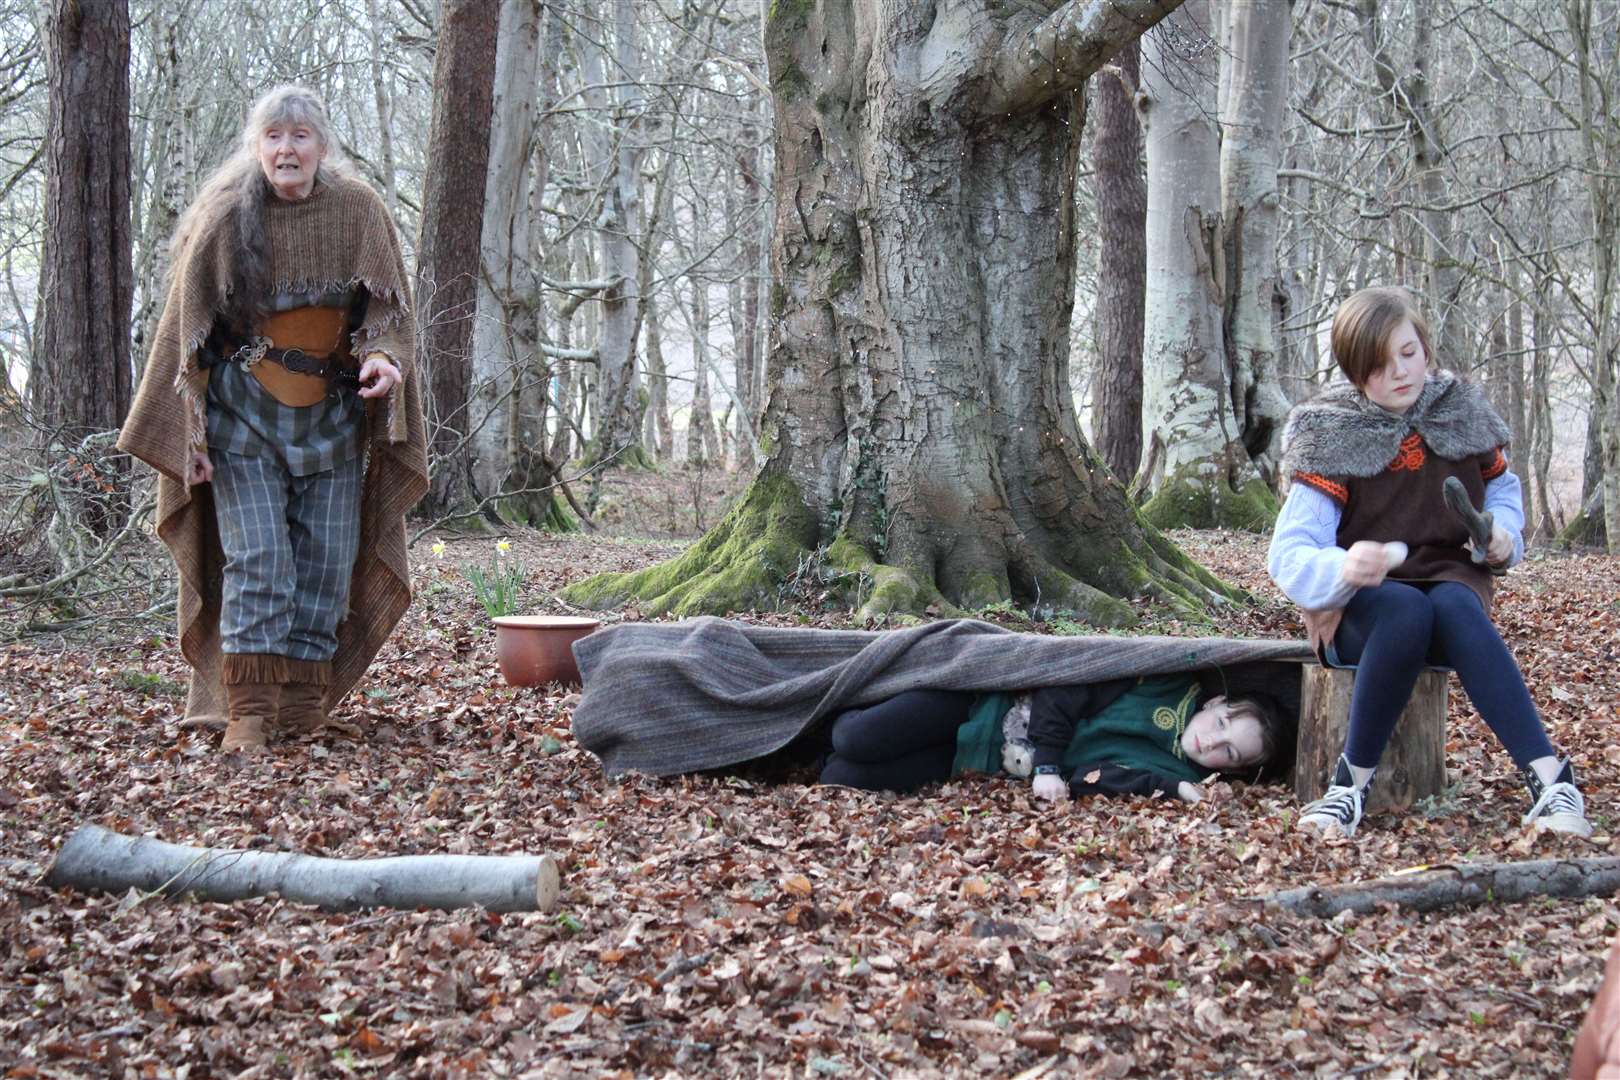 Young Curators Club members brought to life tales of a band of Iron Age warriors.